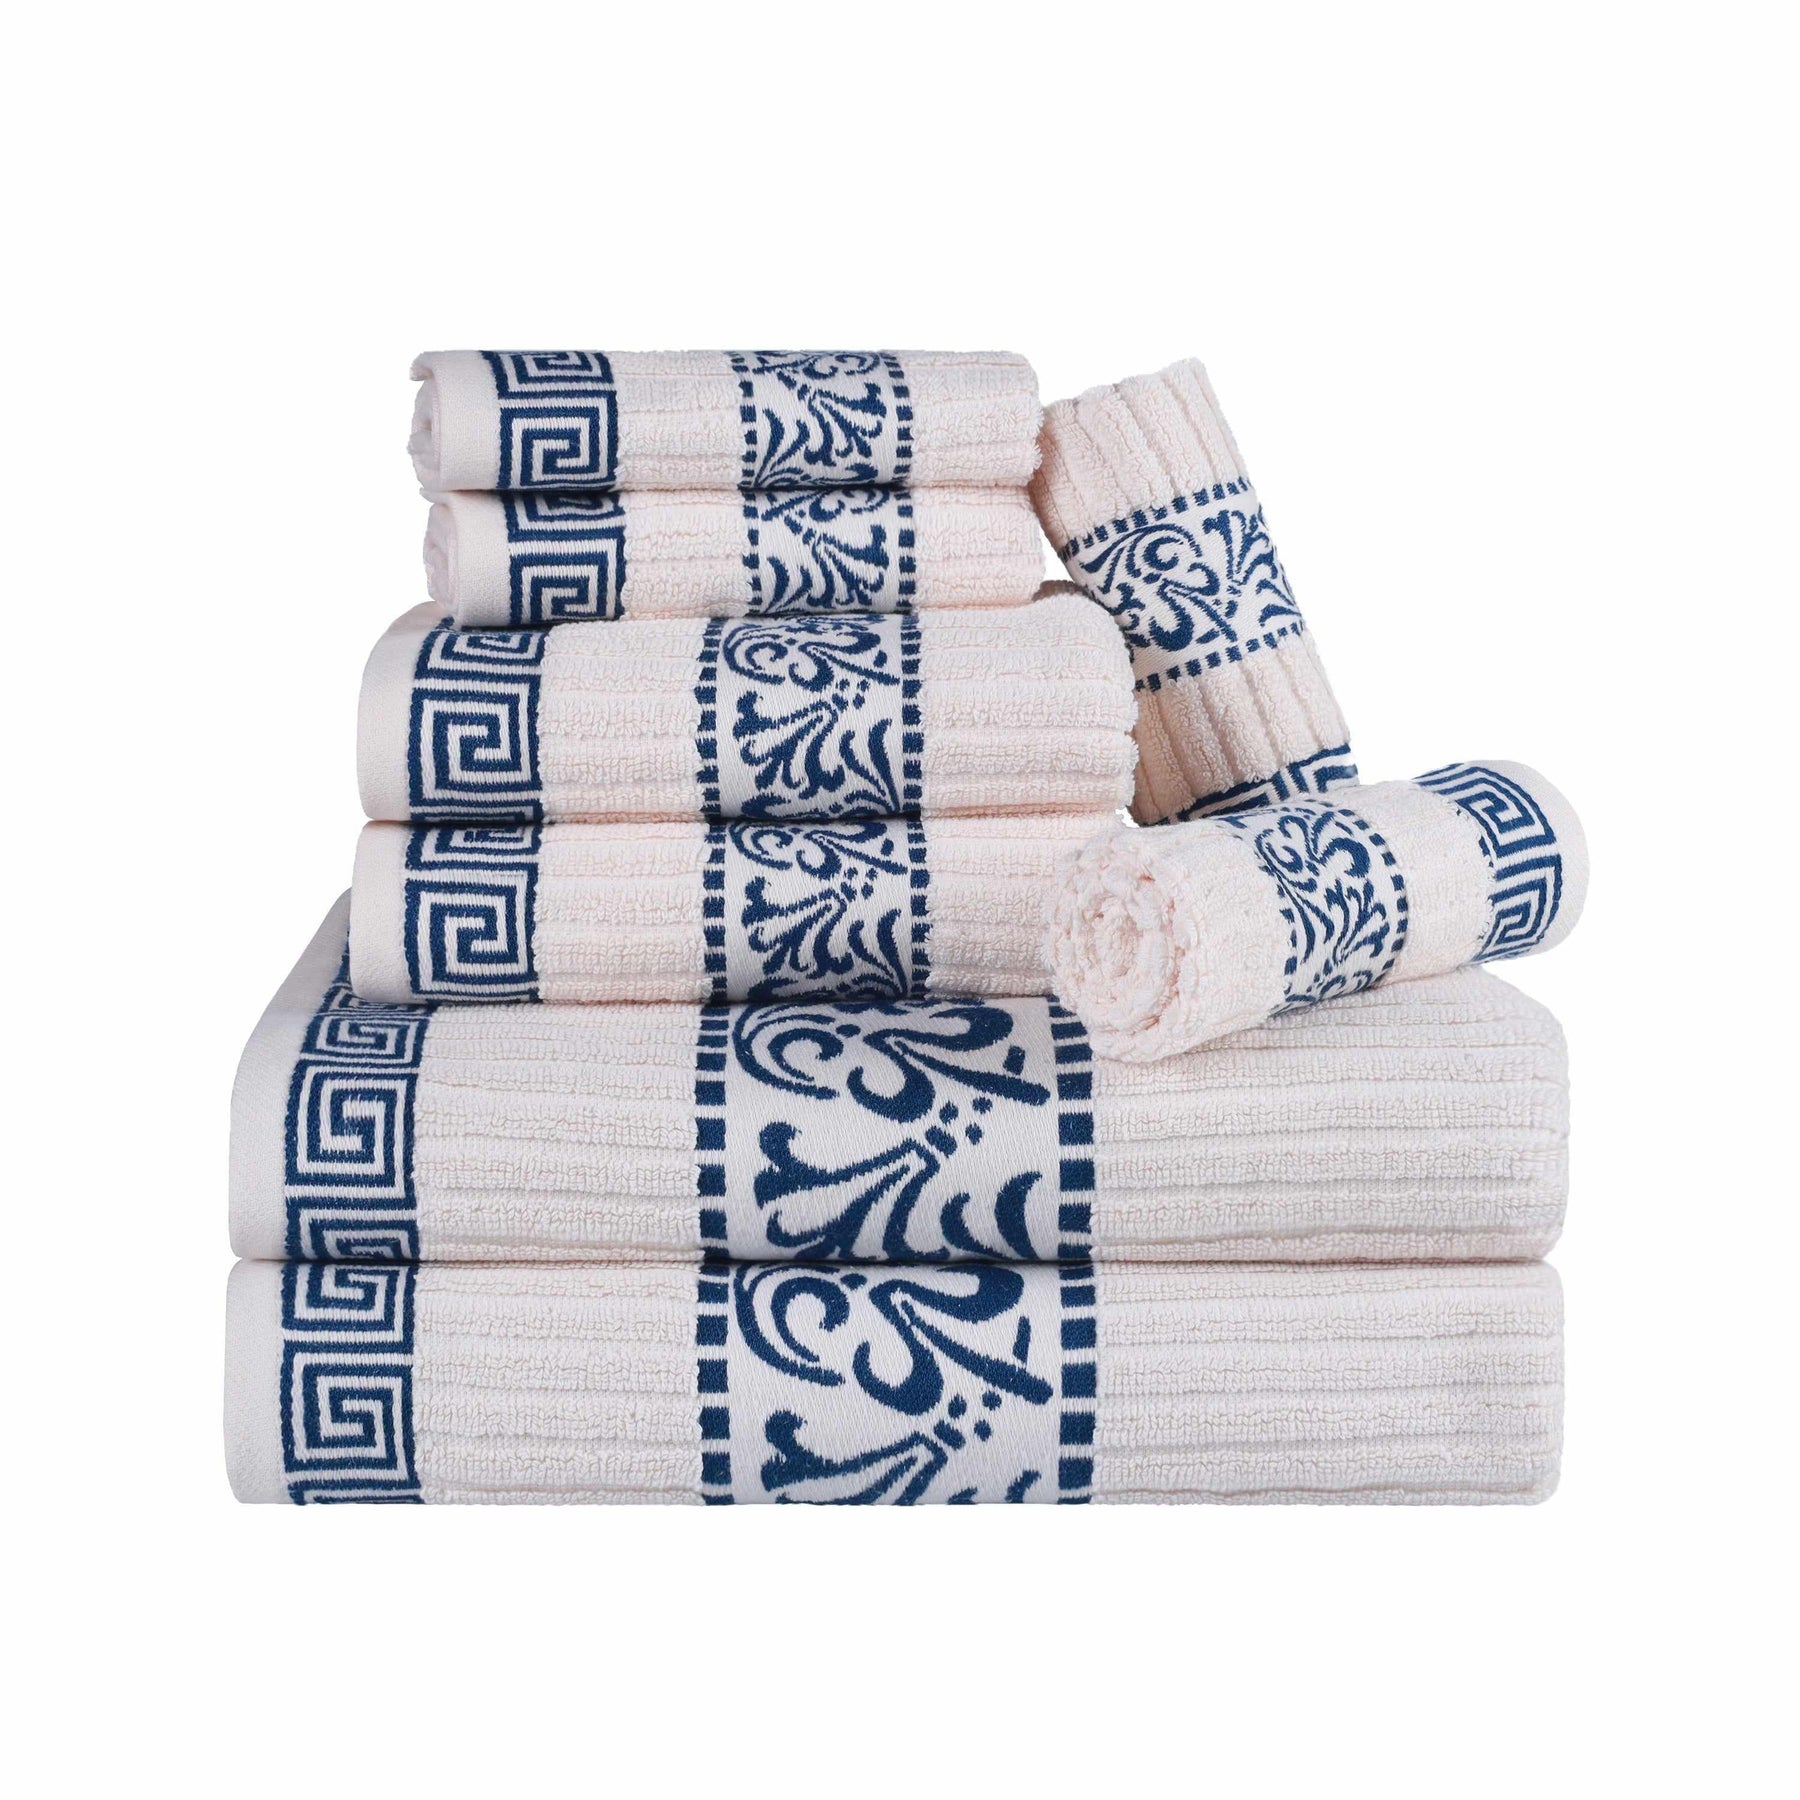 Superior Athens Cotton 8-Piece Towel Set with Greek Scroll and Floral Pattern - Ivory-Navy